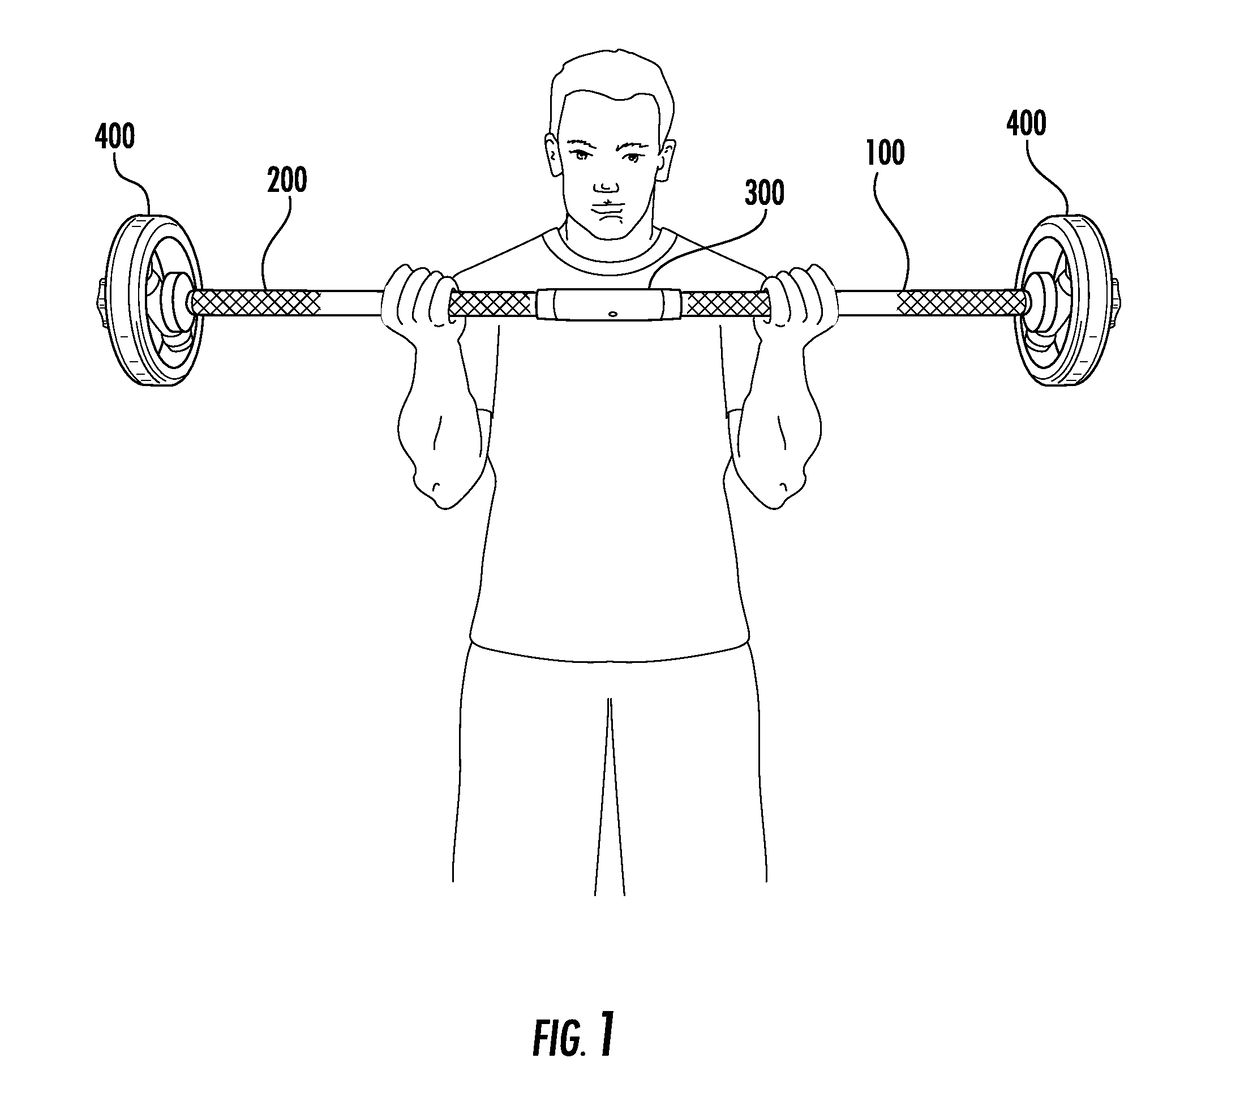 Device and method of use for a versatile fitness bar